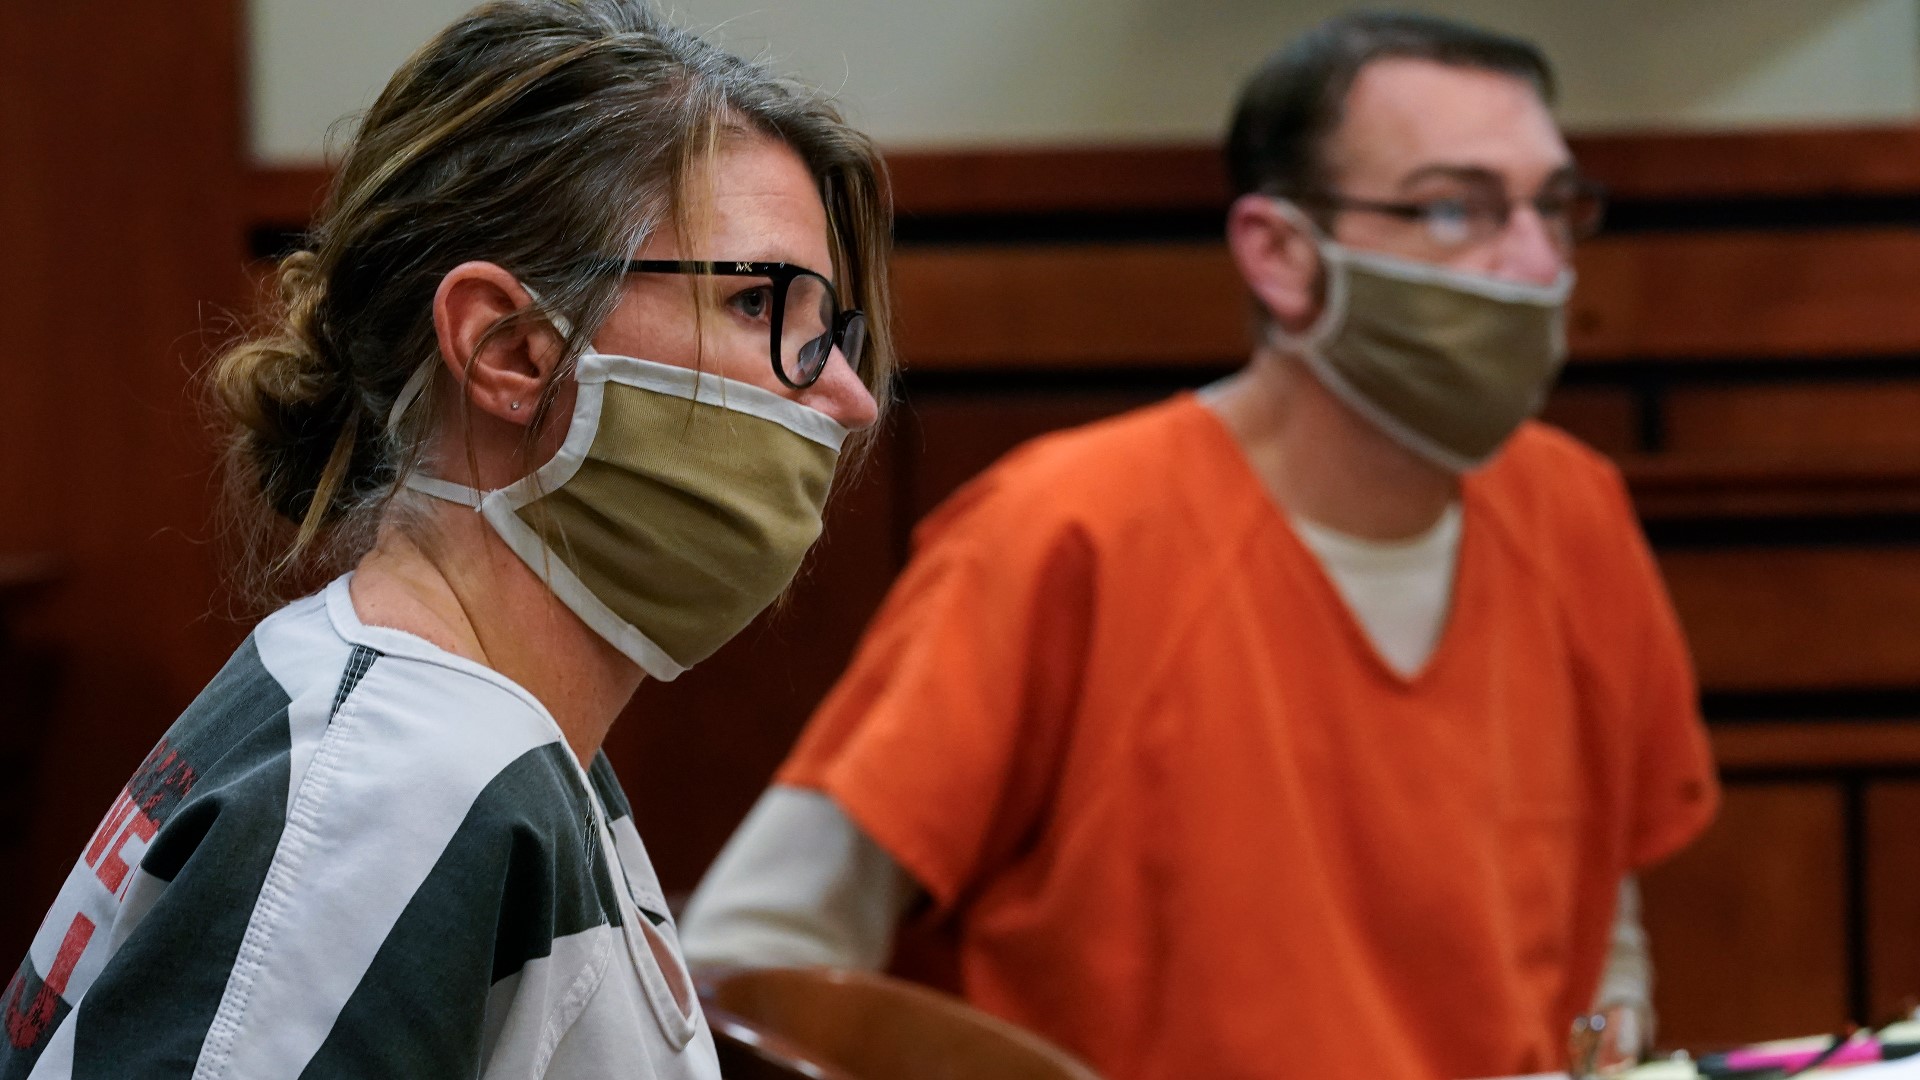 Jennifer and James Crumbley are the first parents convicted in a U.S. mass school shooting.